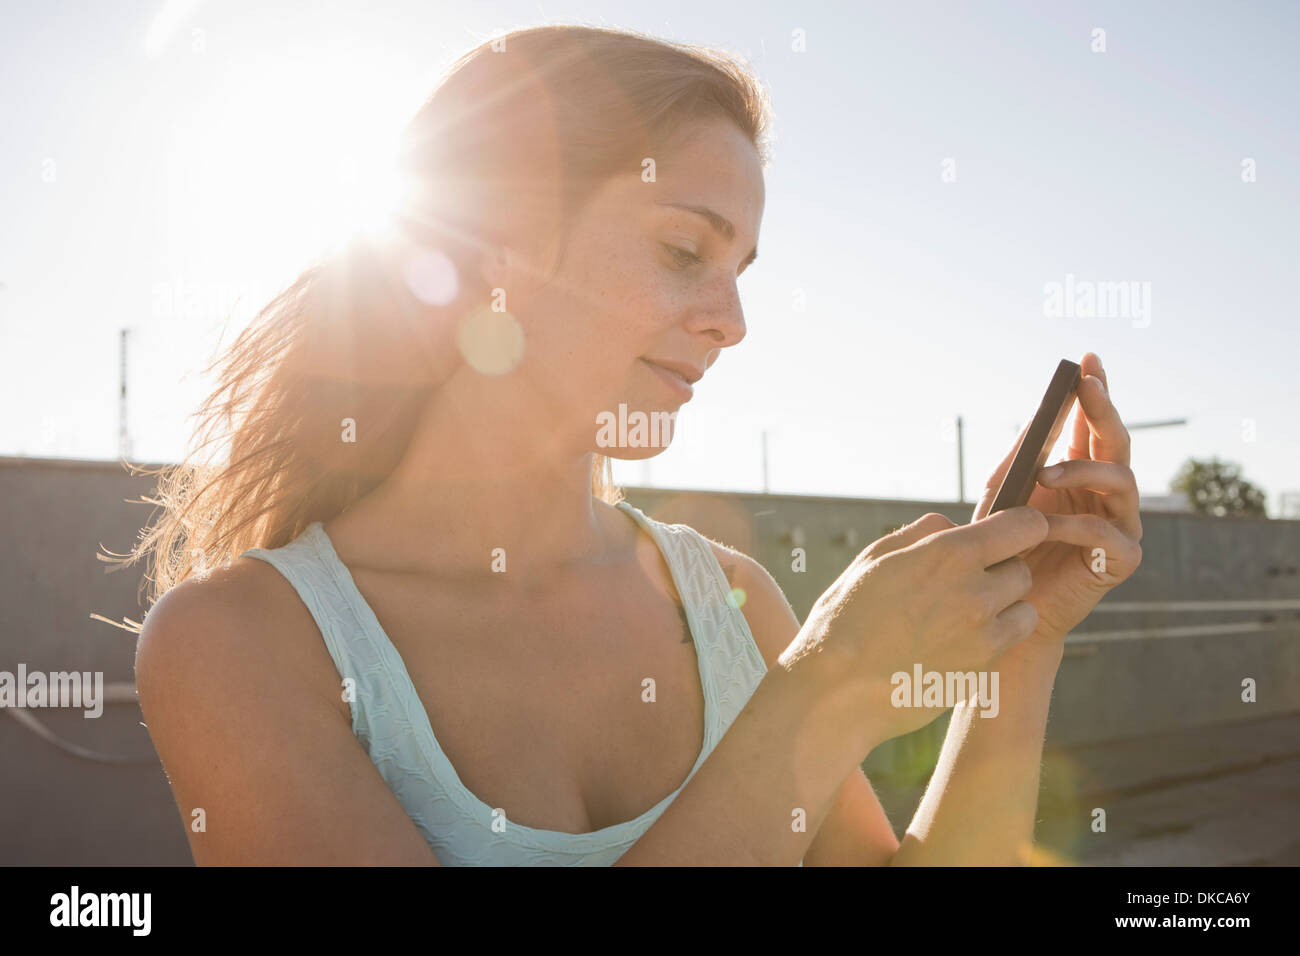 Portrait of young woman looking at mobile phone Stock Photo